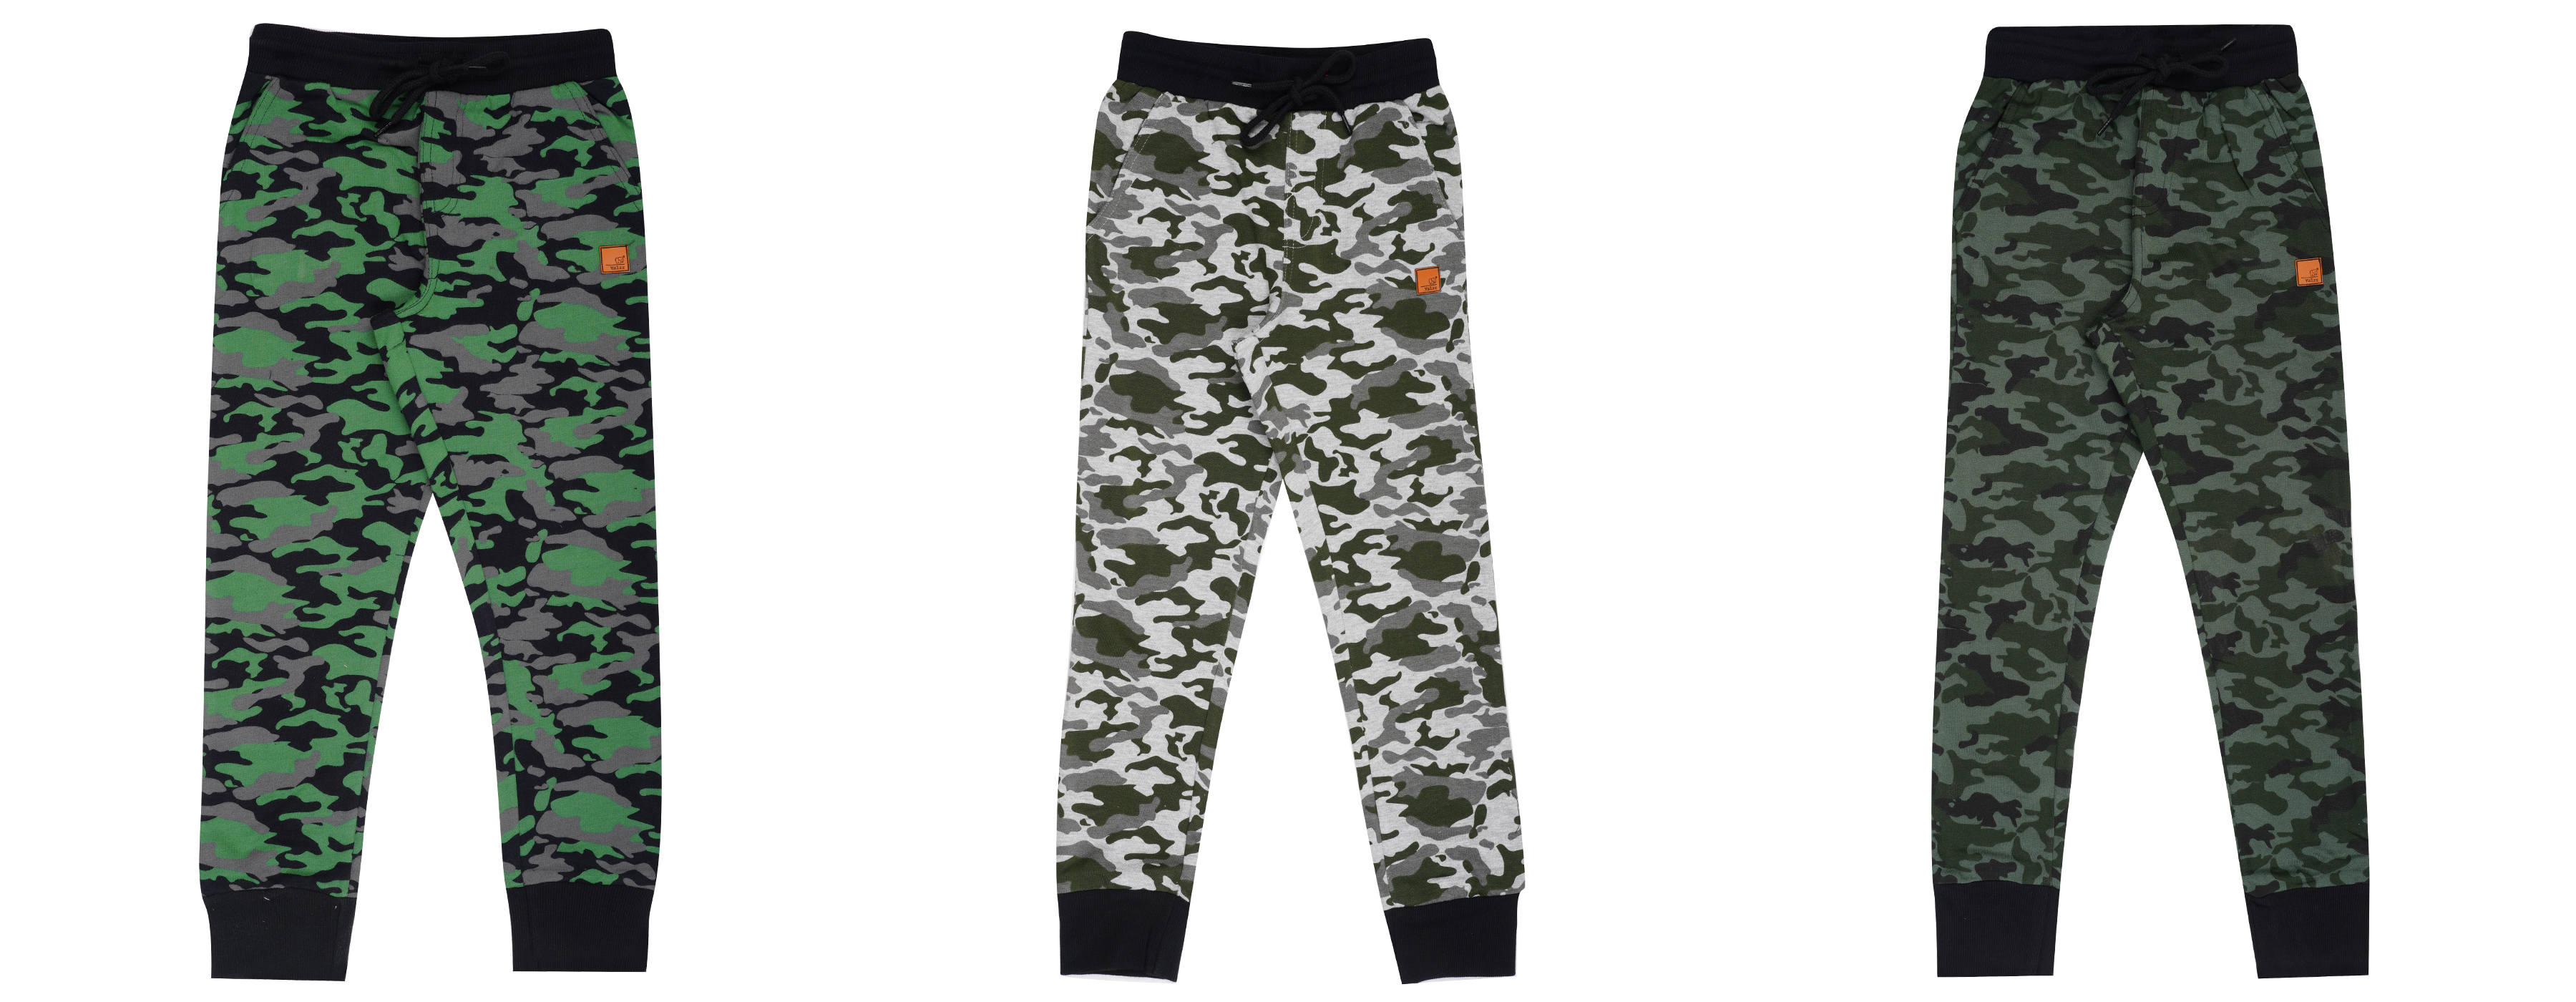 Yalzz Track Pant For Boys Black Pack of 3